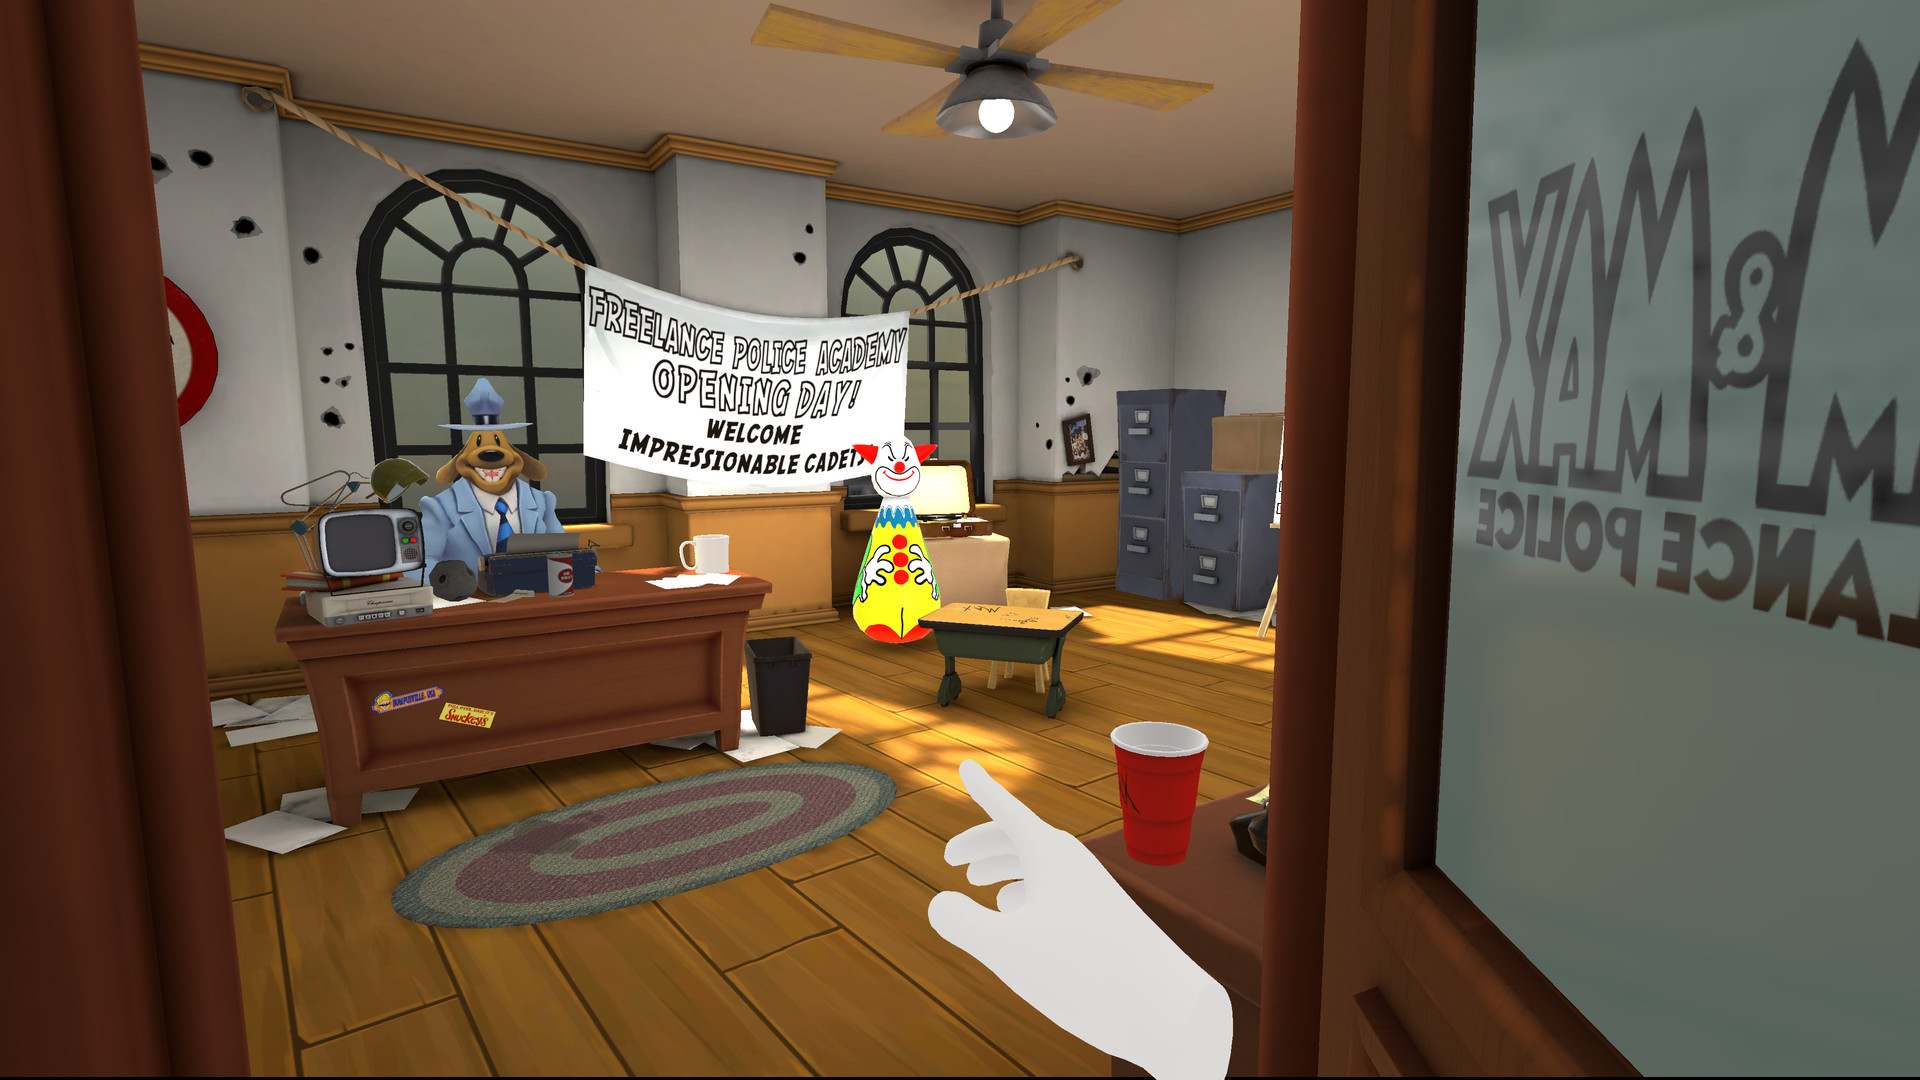 Oculus Quest 游戏《奇妙创通关:虚拟警探》Sam and Max: This Time It’s Virtual!